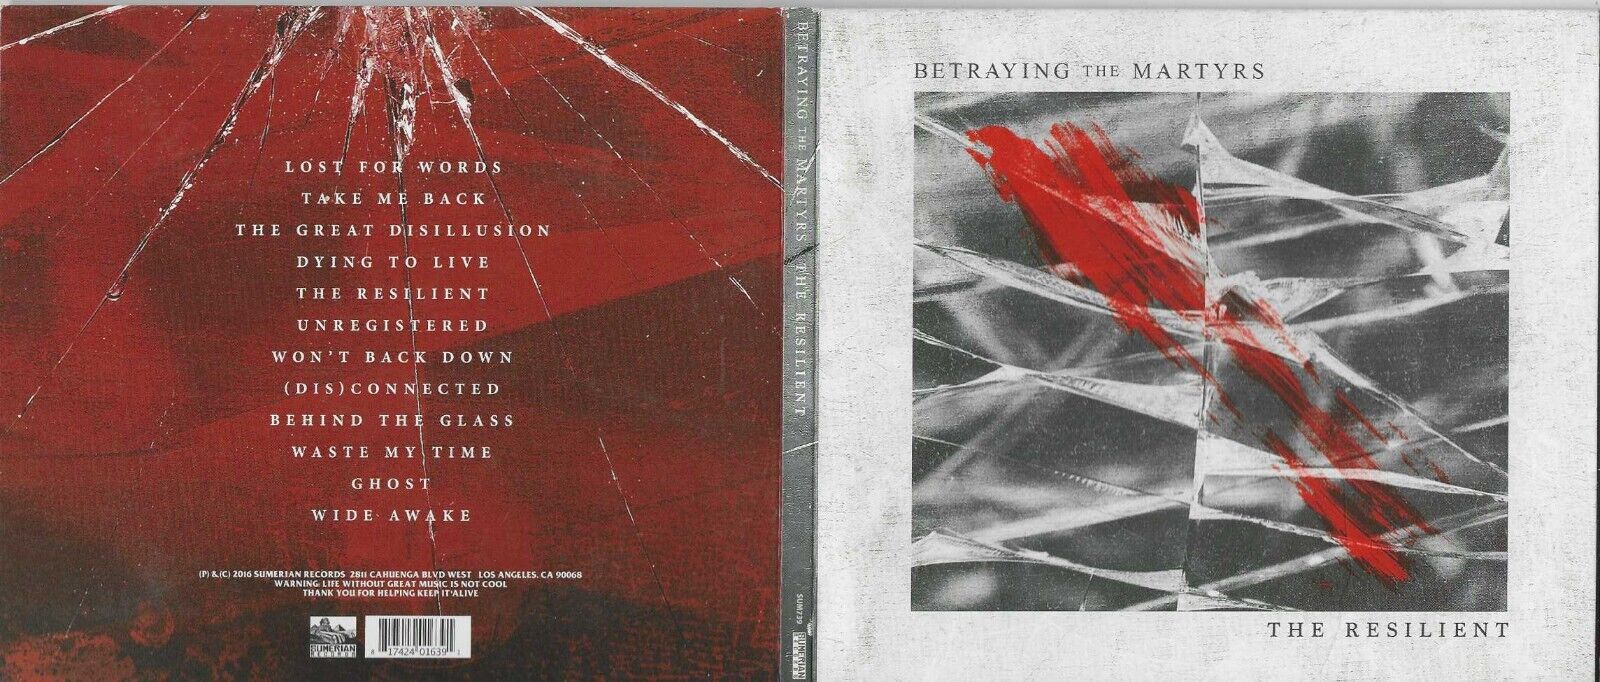 Betraying The Martyrs – The Resilient  Digipak   CD 